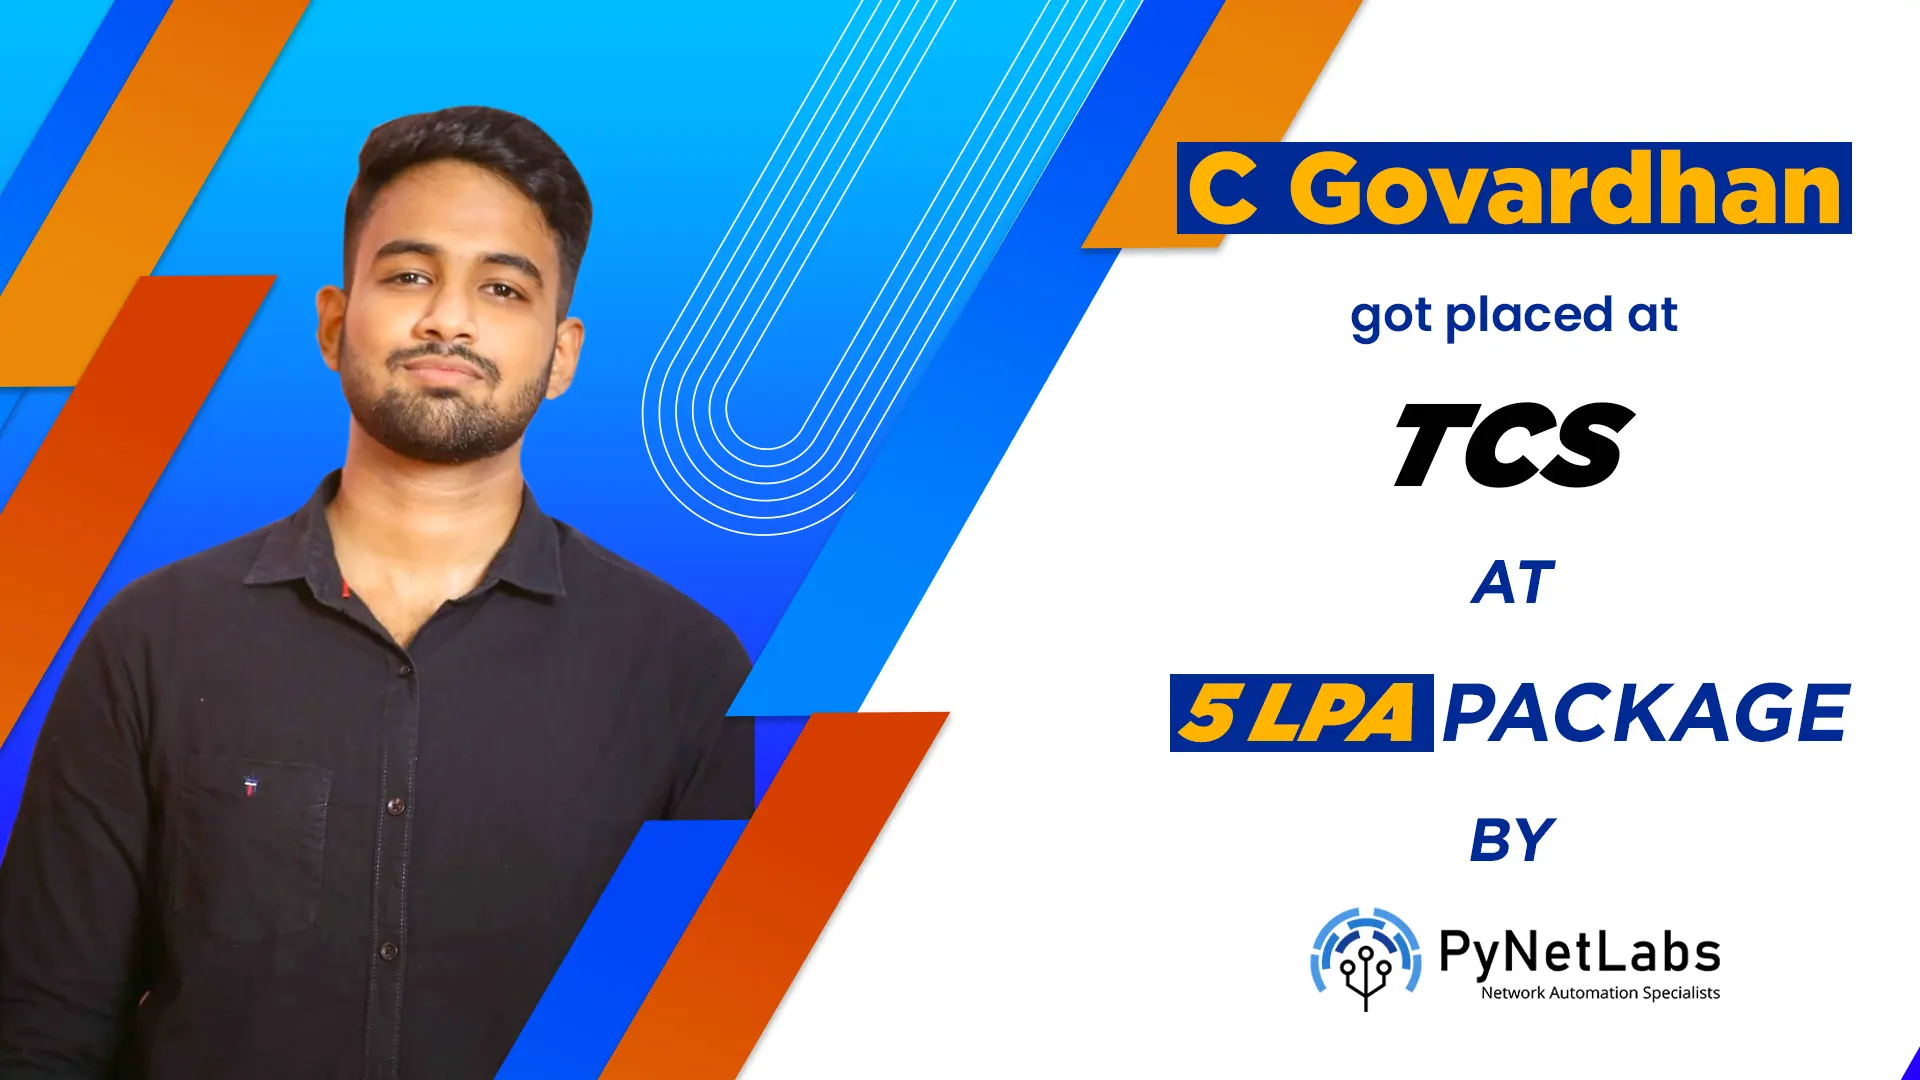 C Govardhan got placed at TCS at 5 LPS Package by PyNet Labs